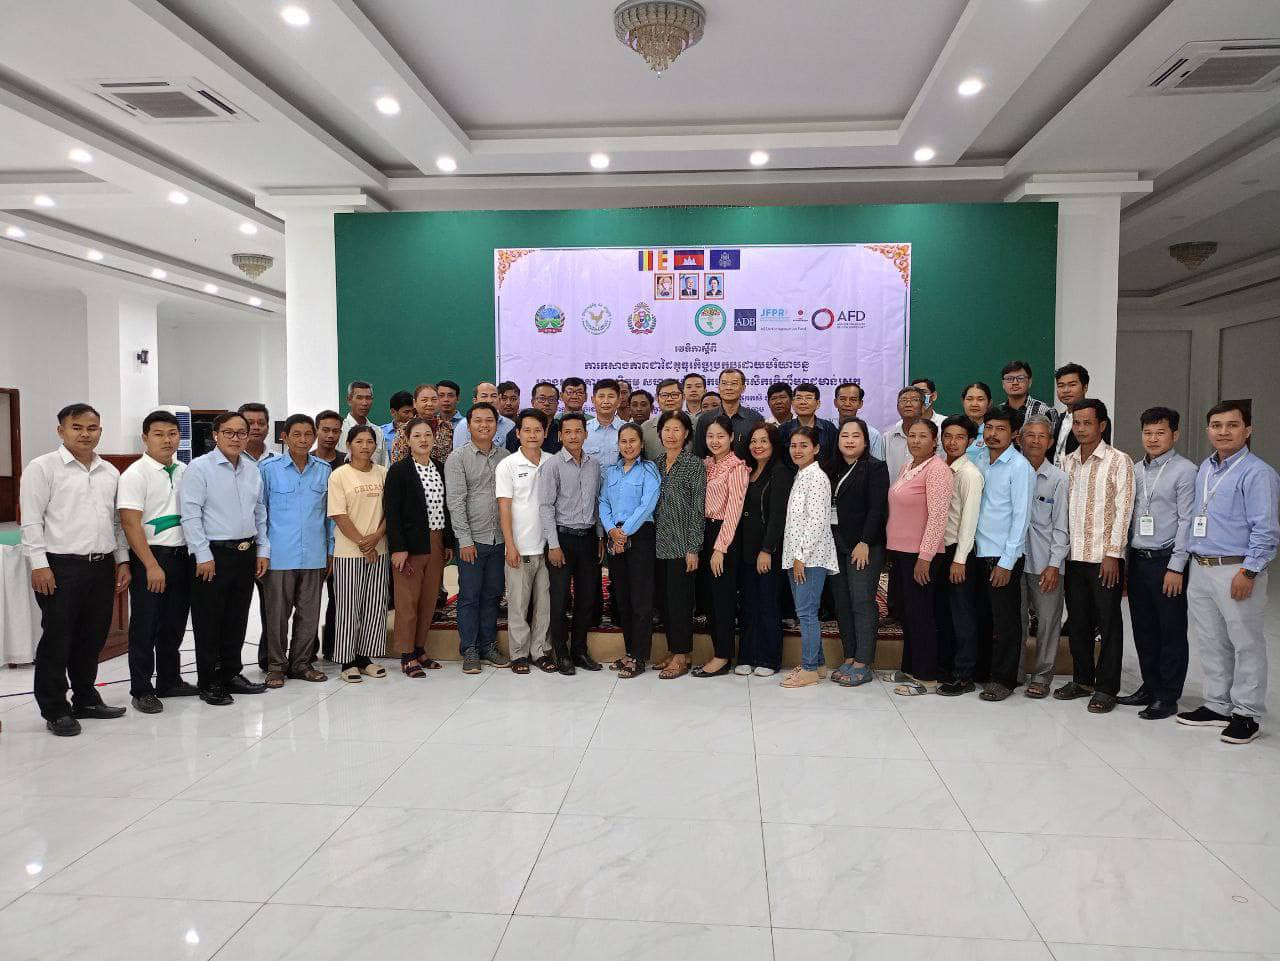 Mobile Unit Kampong Cham province has attended the forum on partnership building between agricultural enterprises, agricultural cooperatives, and poultry raising farmers